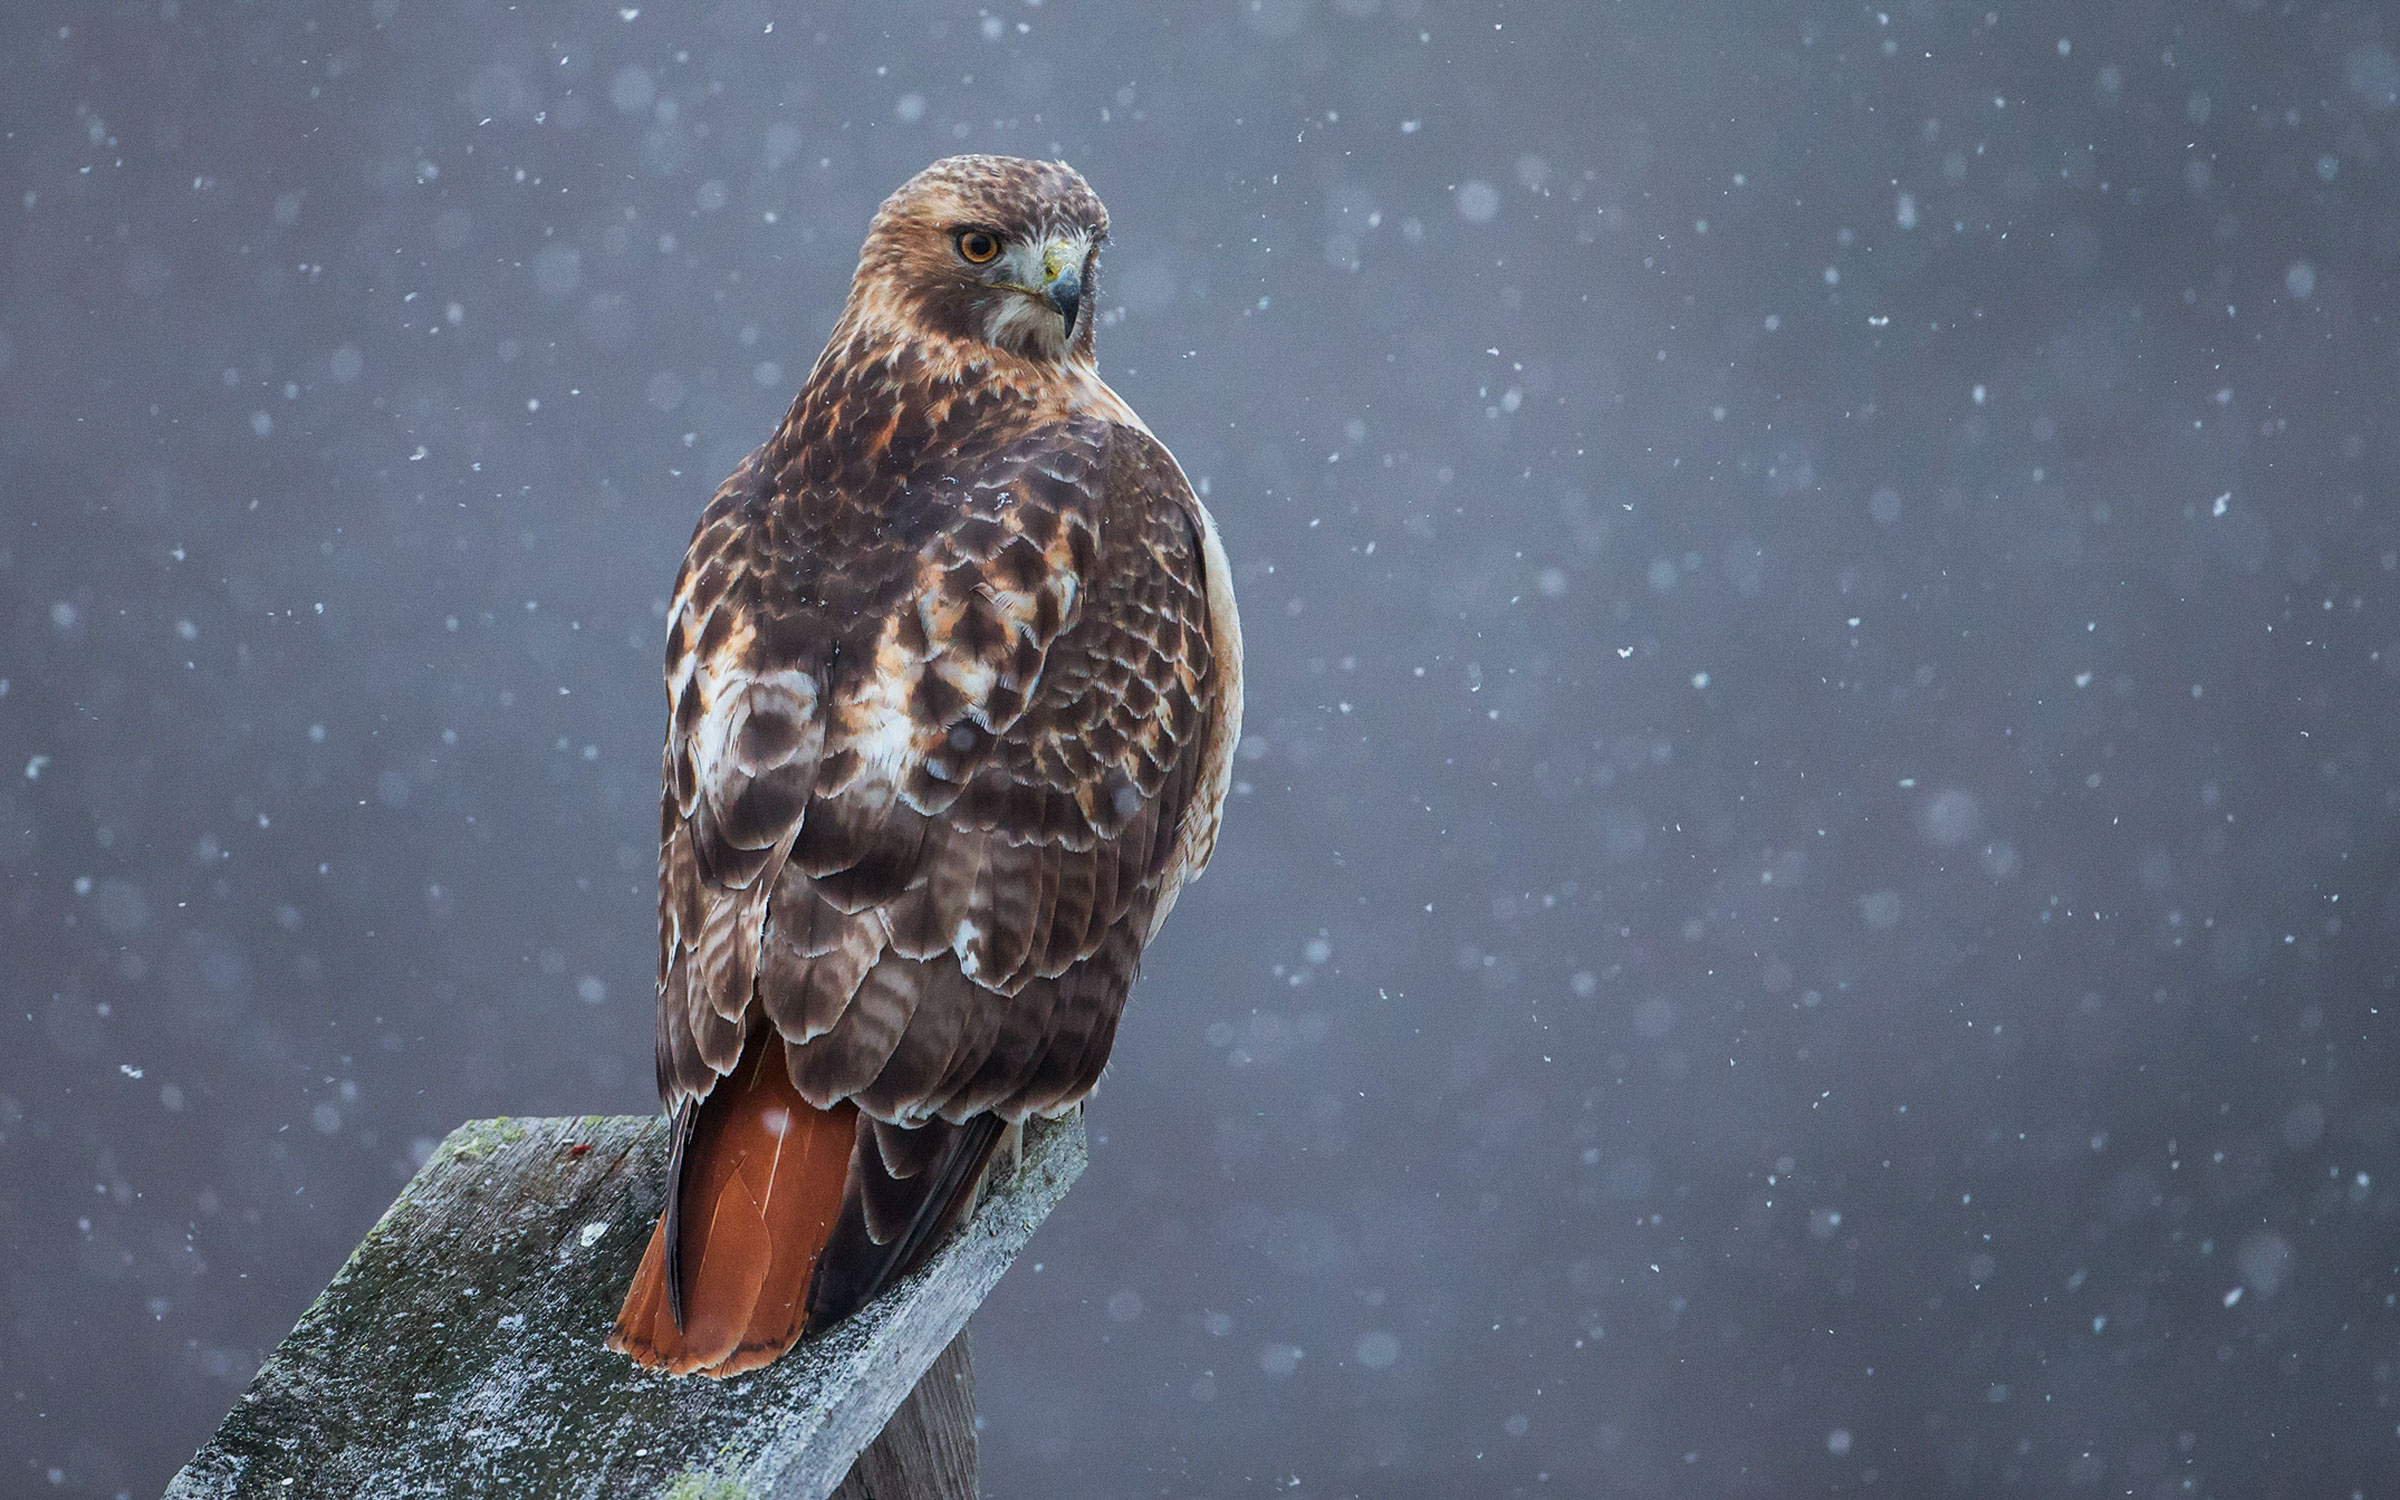 Red tailed hawk wallpaper, High-quality download, Stunning visuals, 2400x1500 HD Desktop